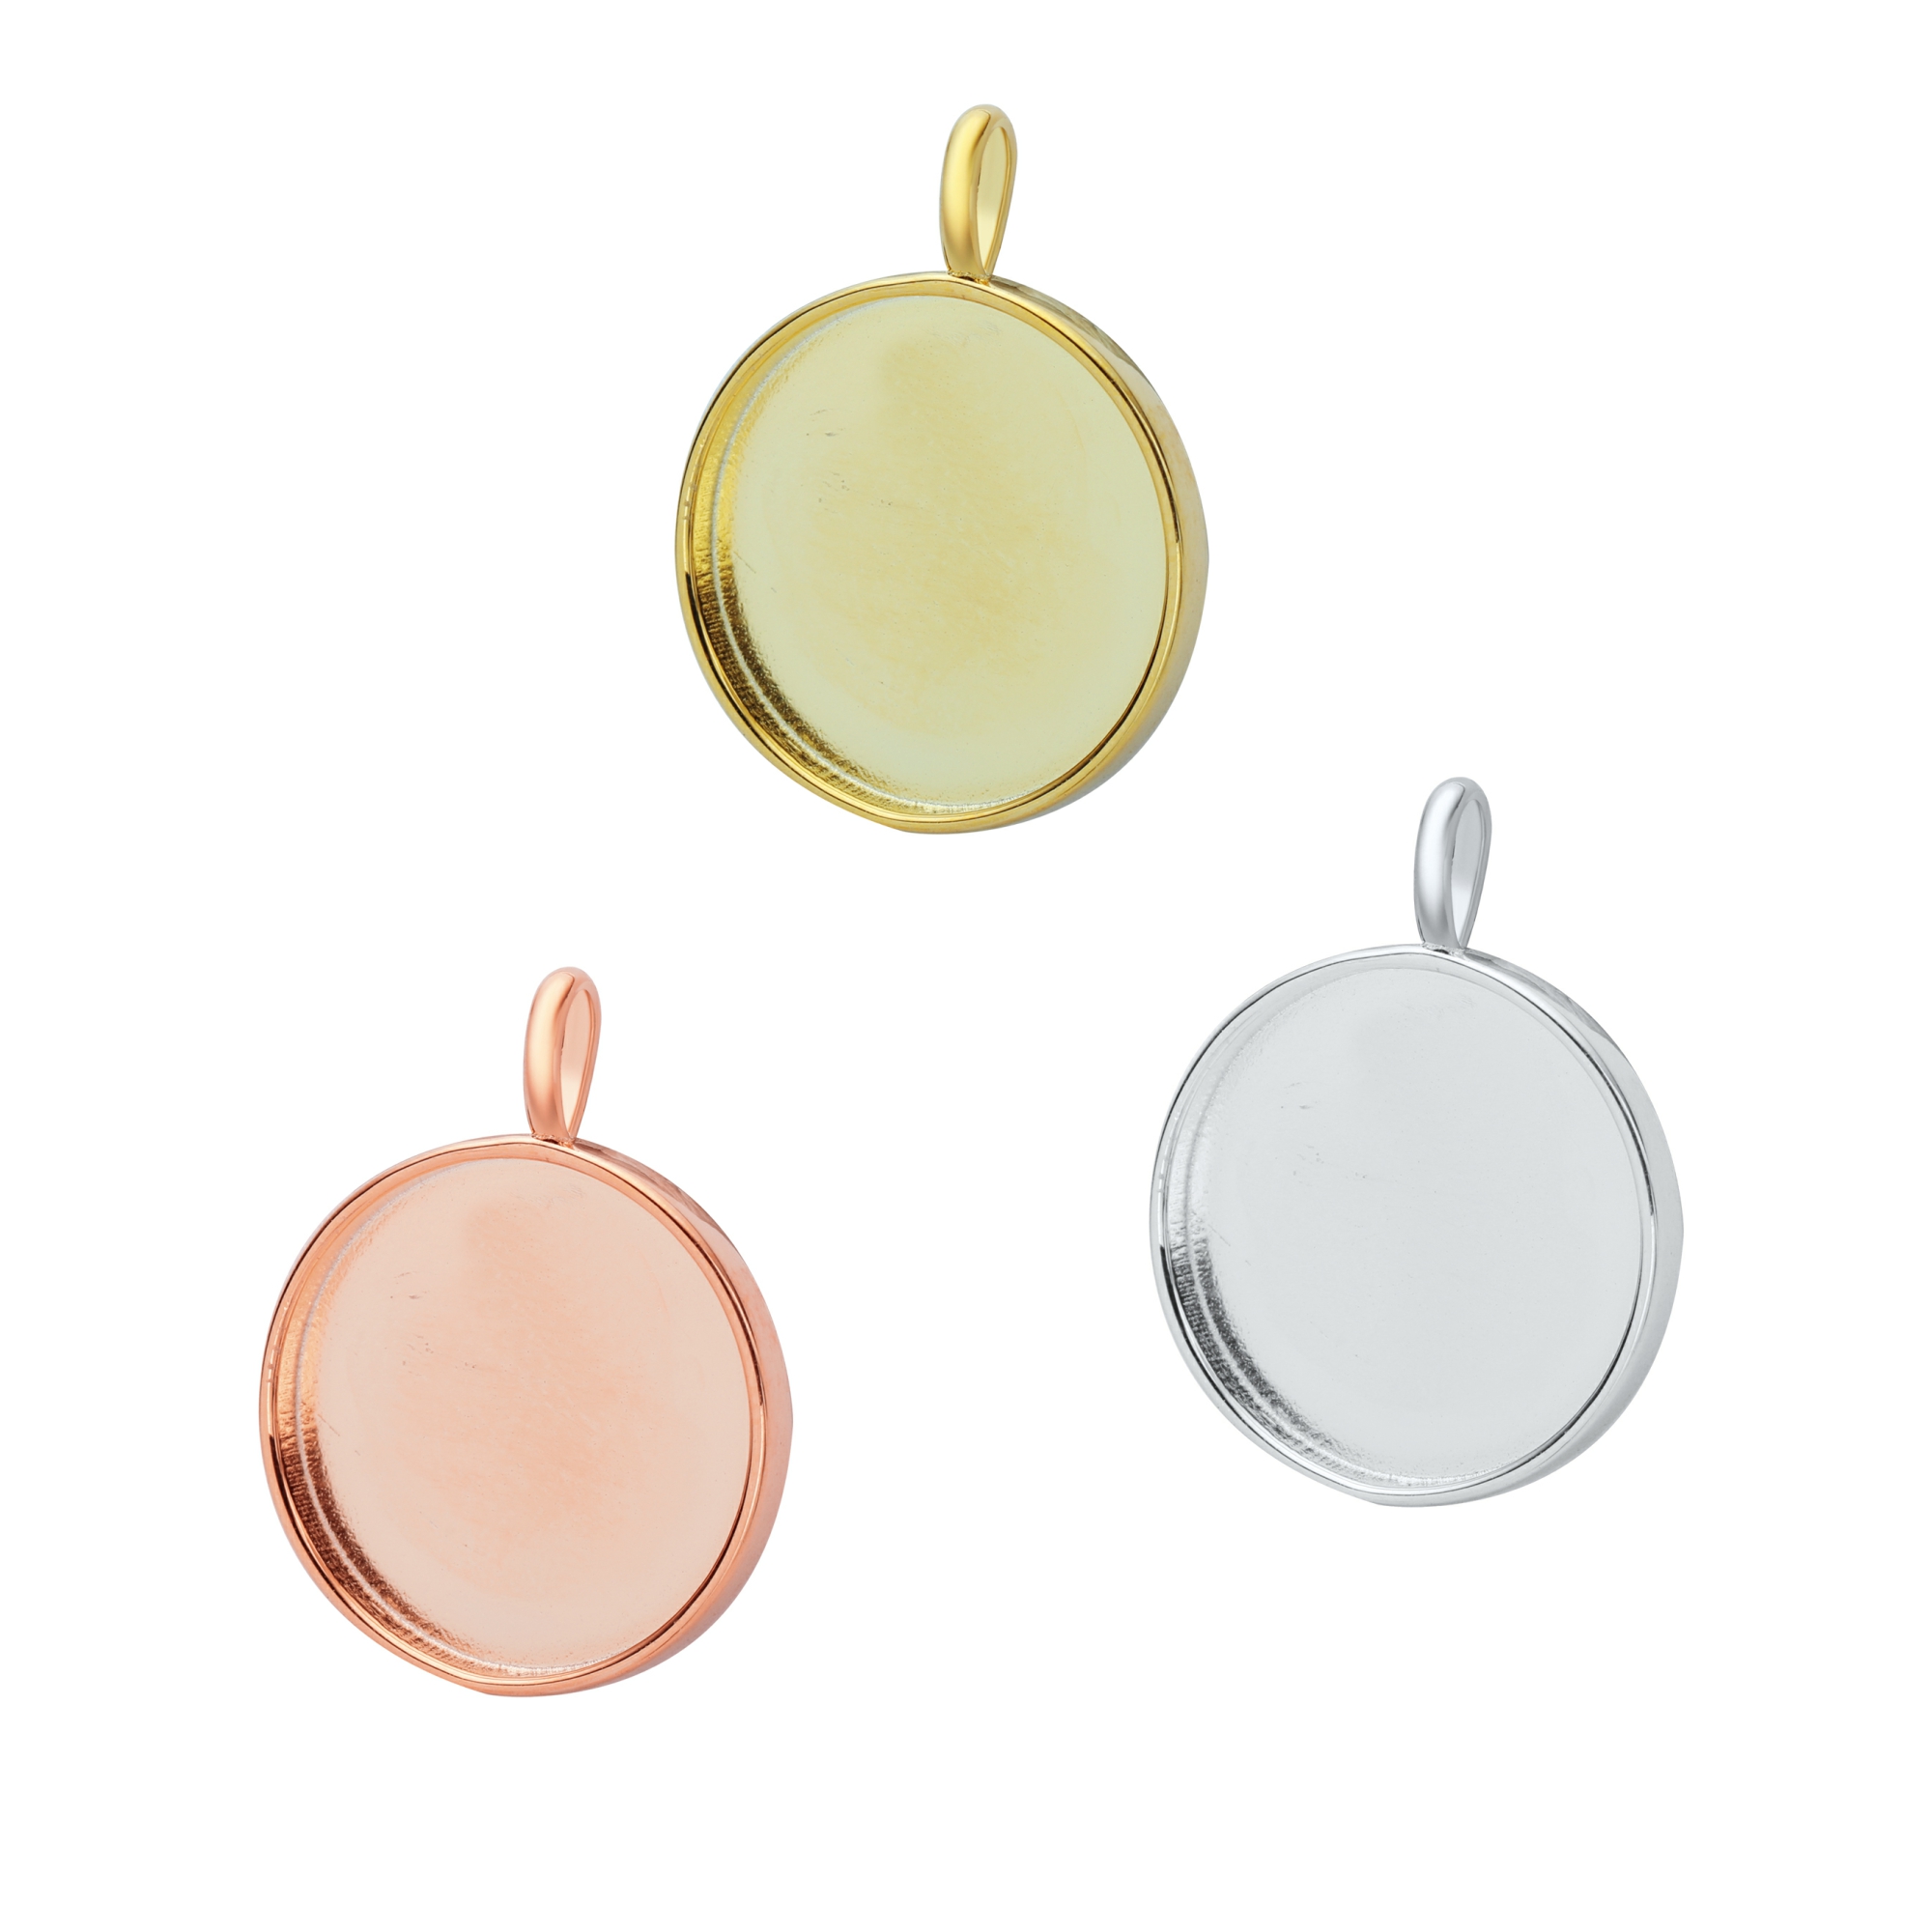 Keepsake Breast Milk Resin Round Pendant Bezel Settings,Solid 14K 18K Gold Pendant Charm,Solid Back Round Pendant,DIY Memory Jewelry Supplies 1411344 - Click Image to Close